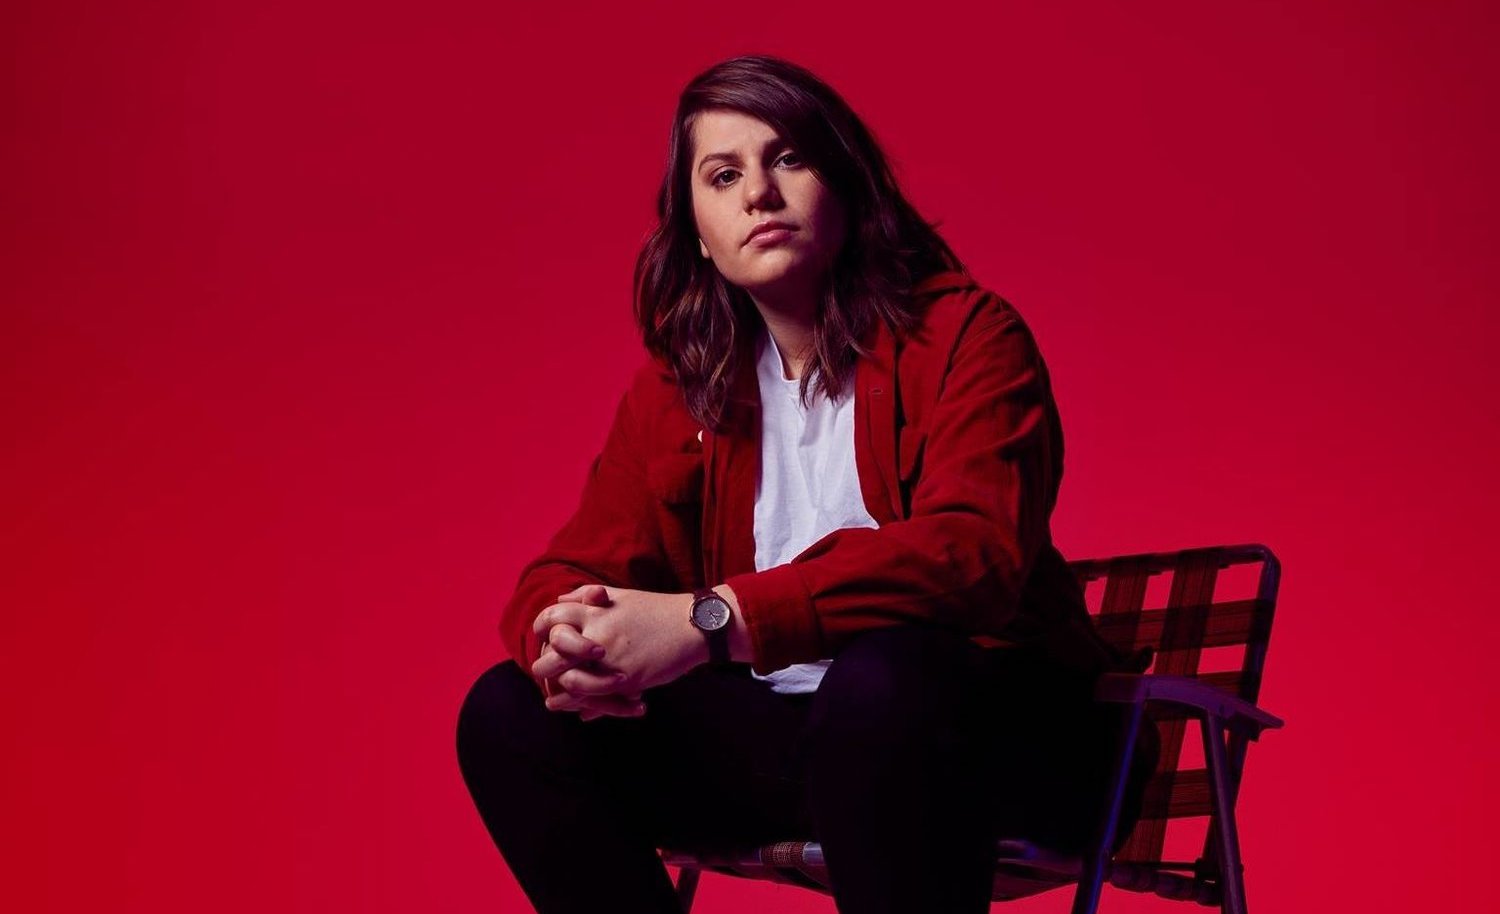 Alex Lahey talks new album, triple j & the importance of touring Perth: “I’ll be honest with you, it costs a lot of money.”